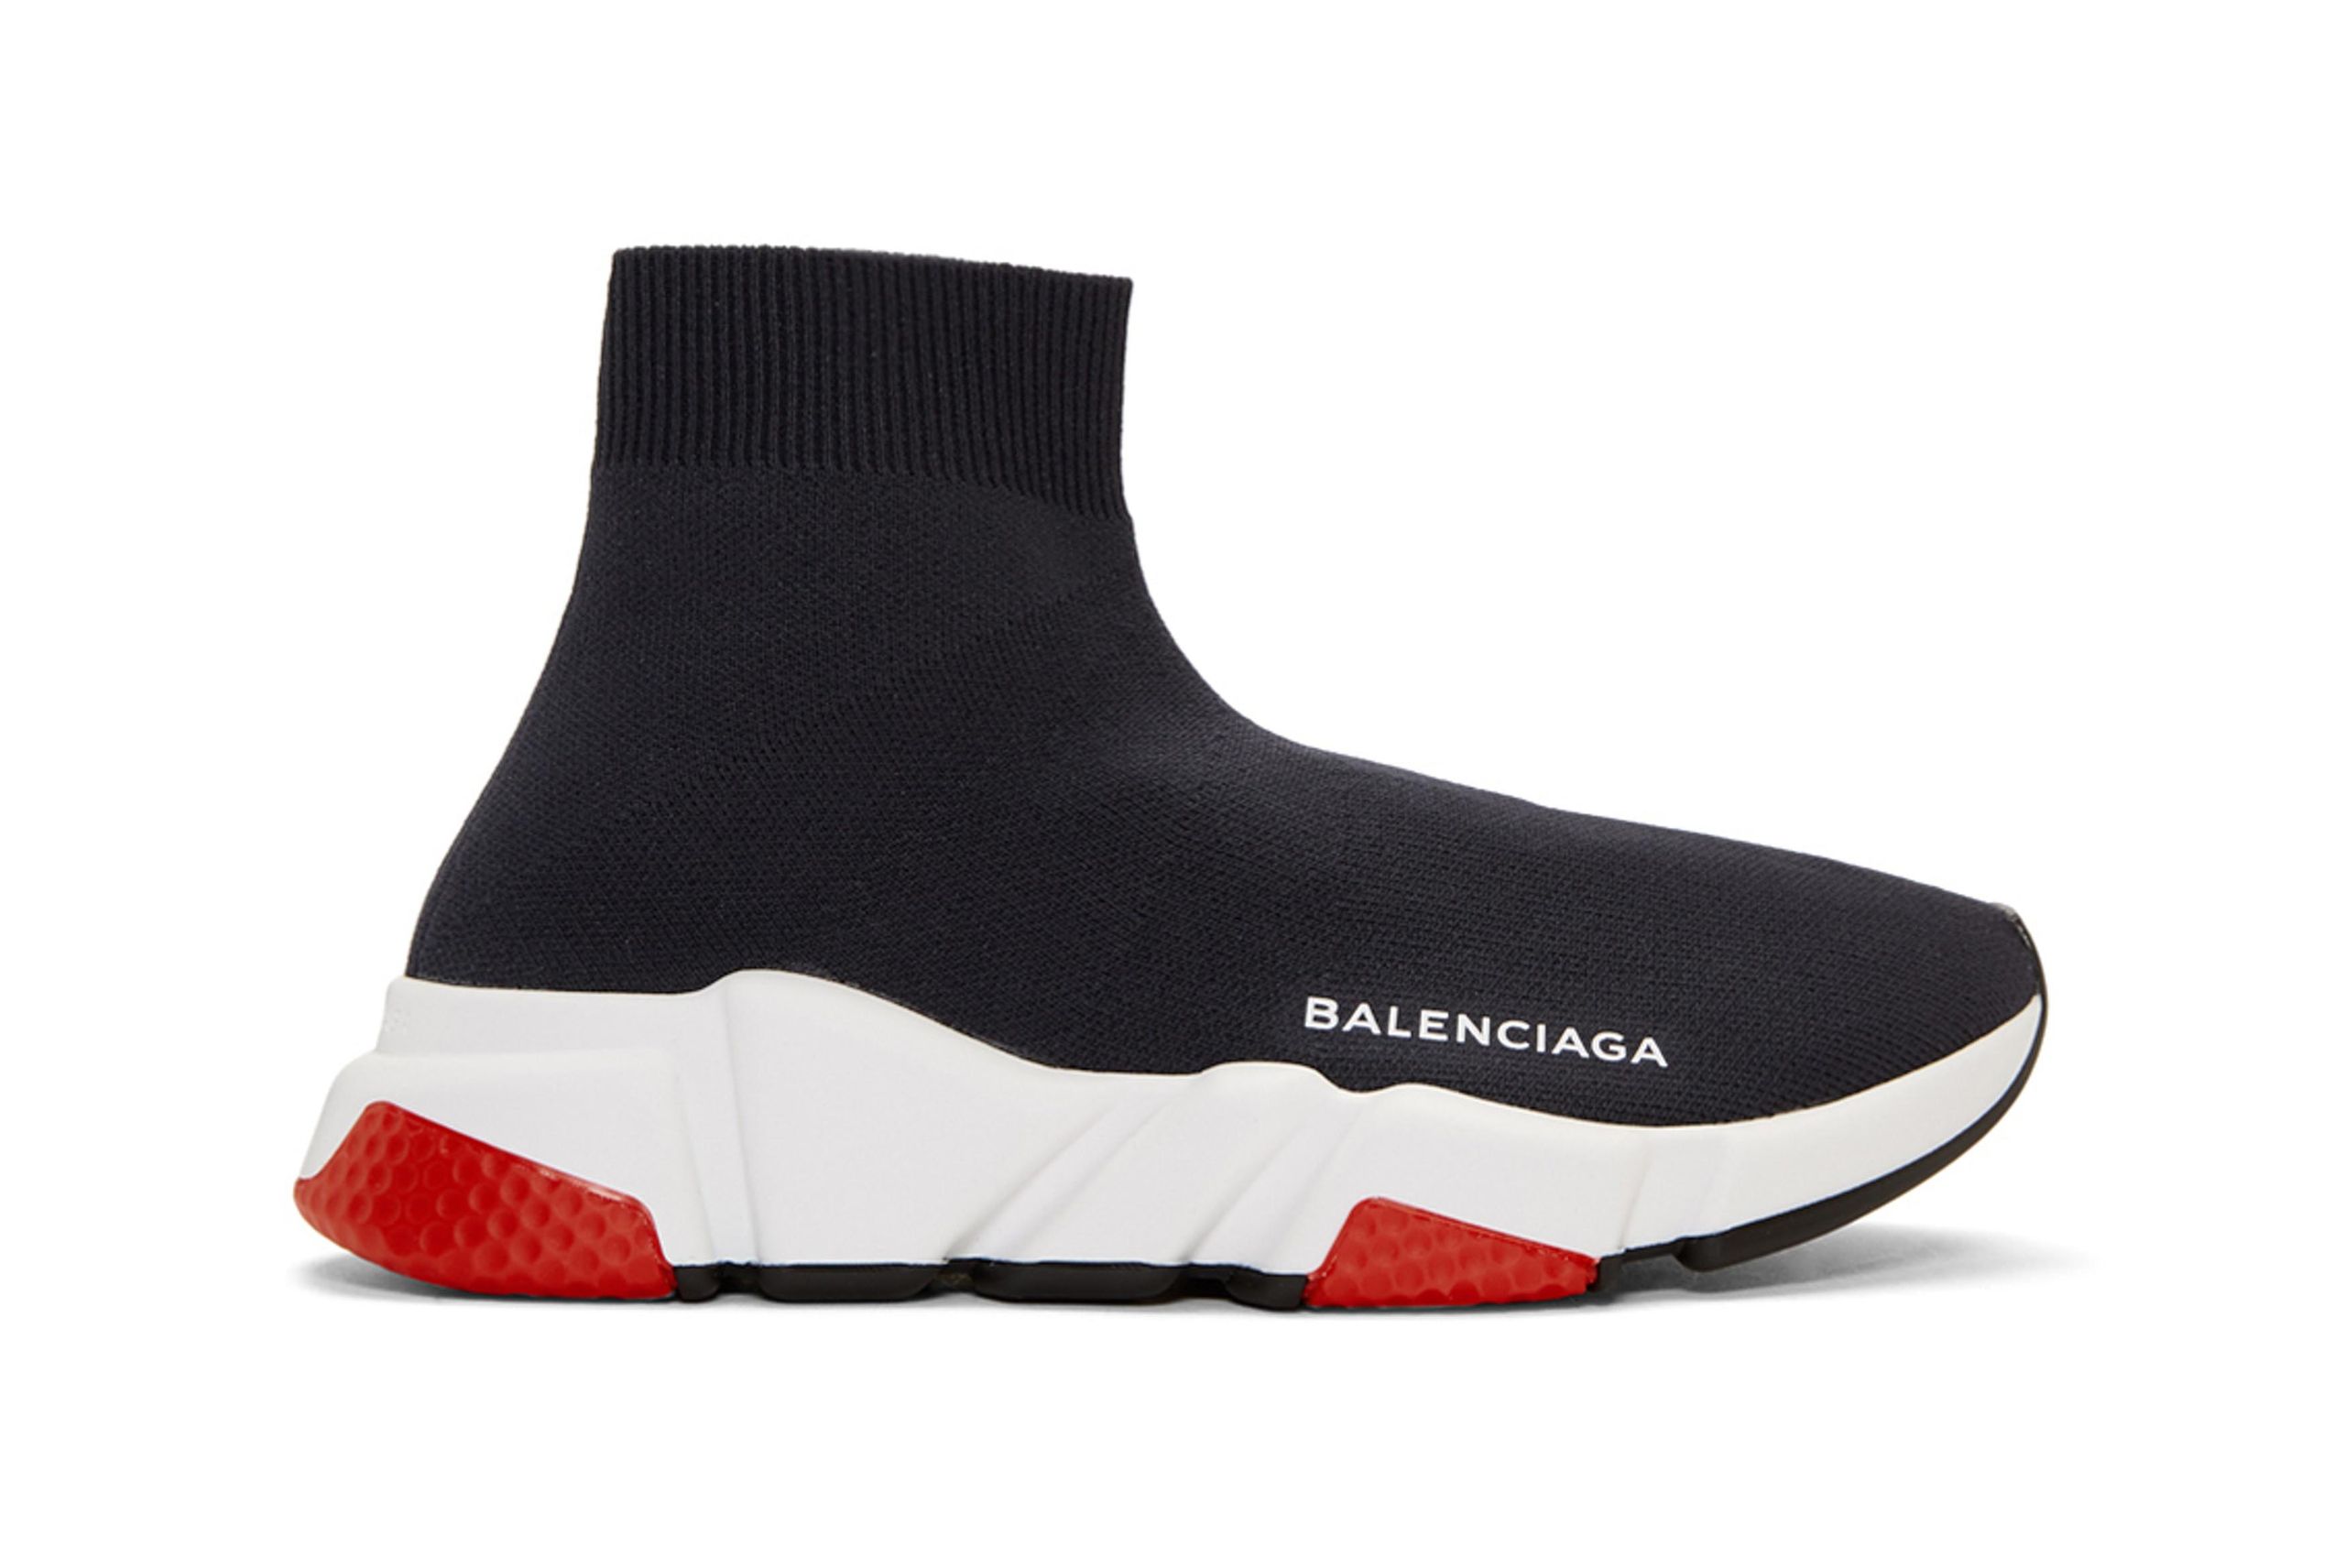 Balenciaga Adds 'Navy' and 'Black' to its Speed Trainer Lineup ...